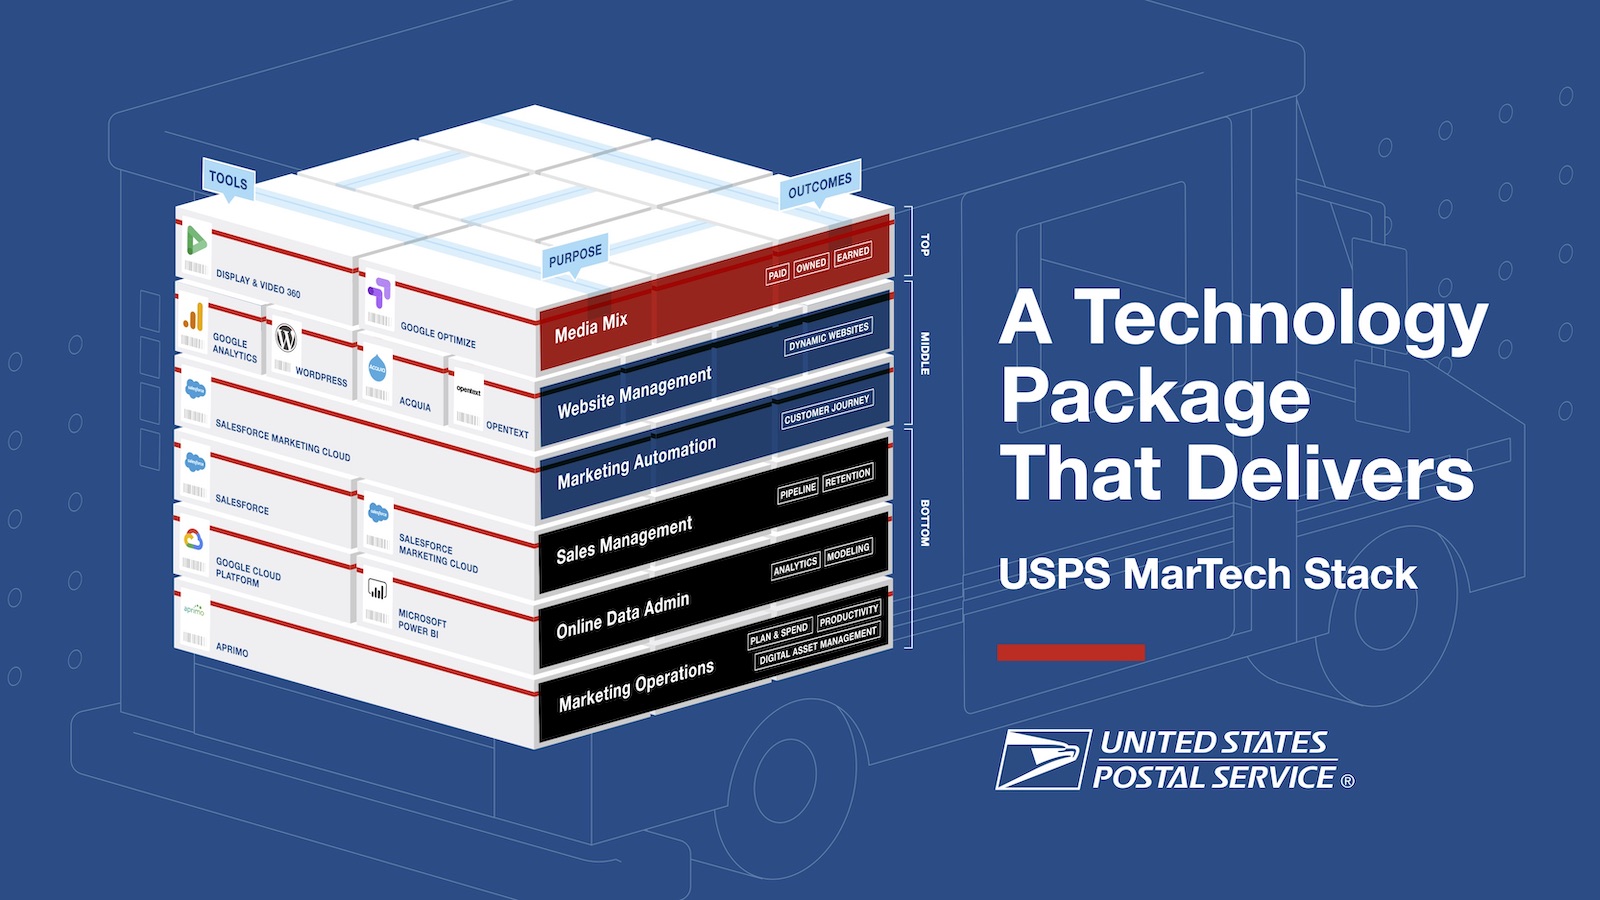 USPS Martech Stack: The 2020 Stackies